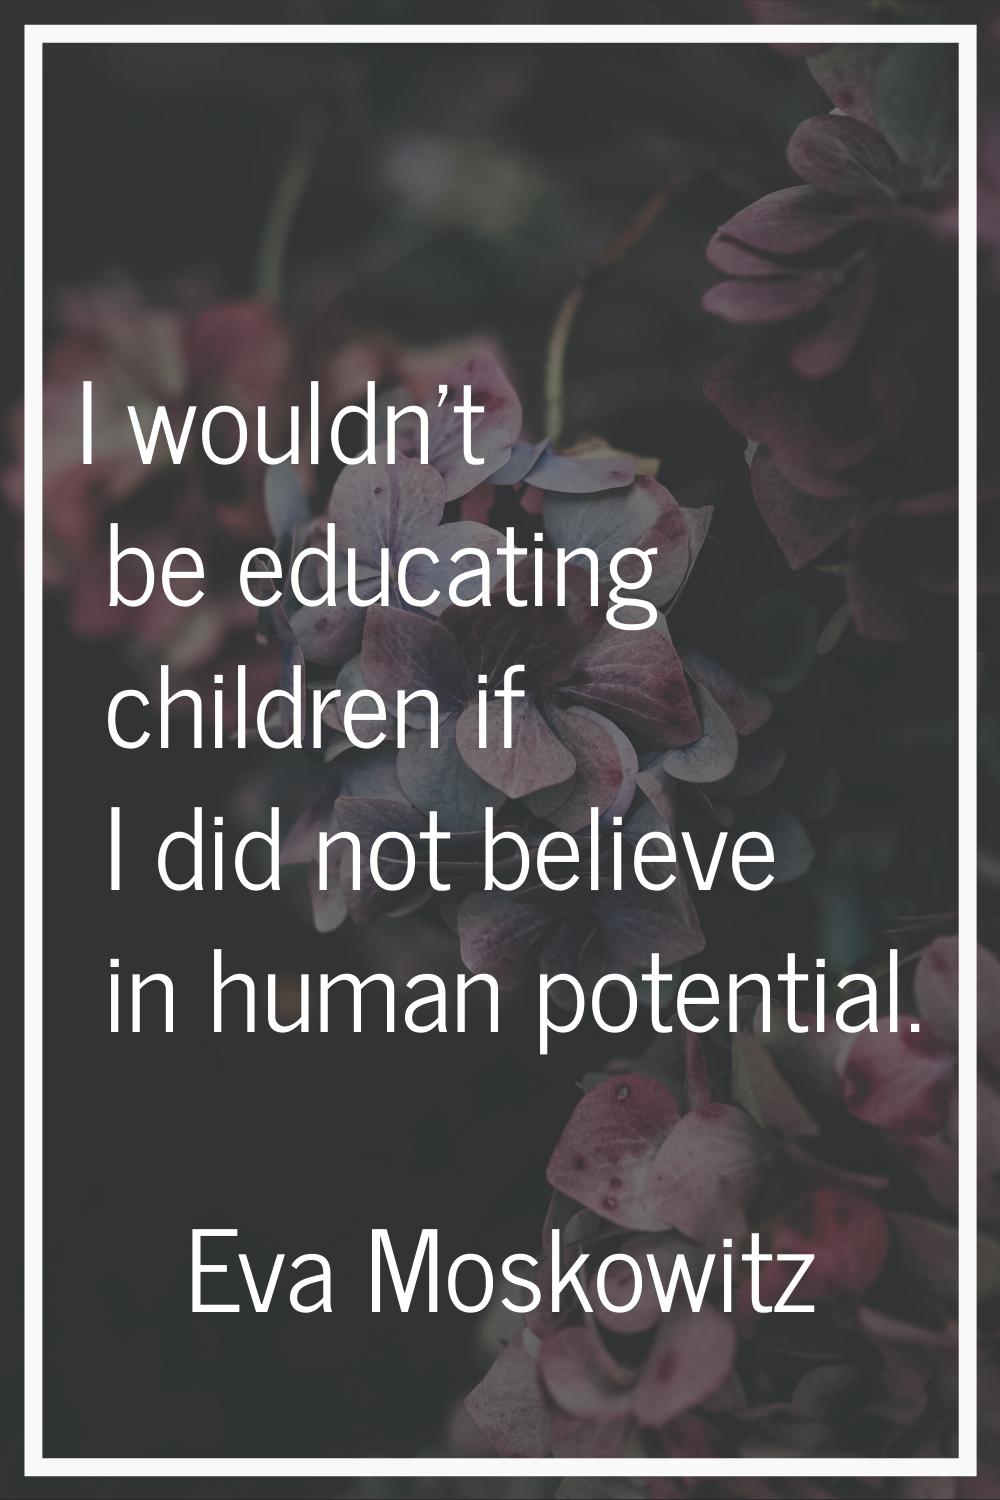 I wouldn't be educating children if I did not believe in human potential.